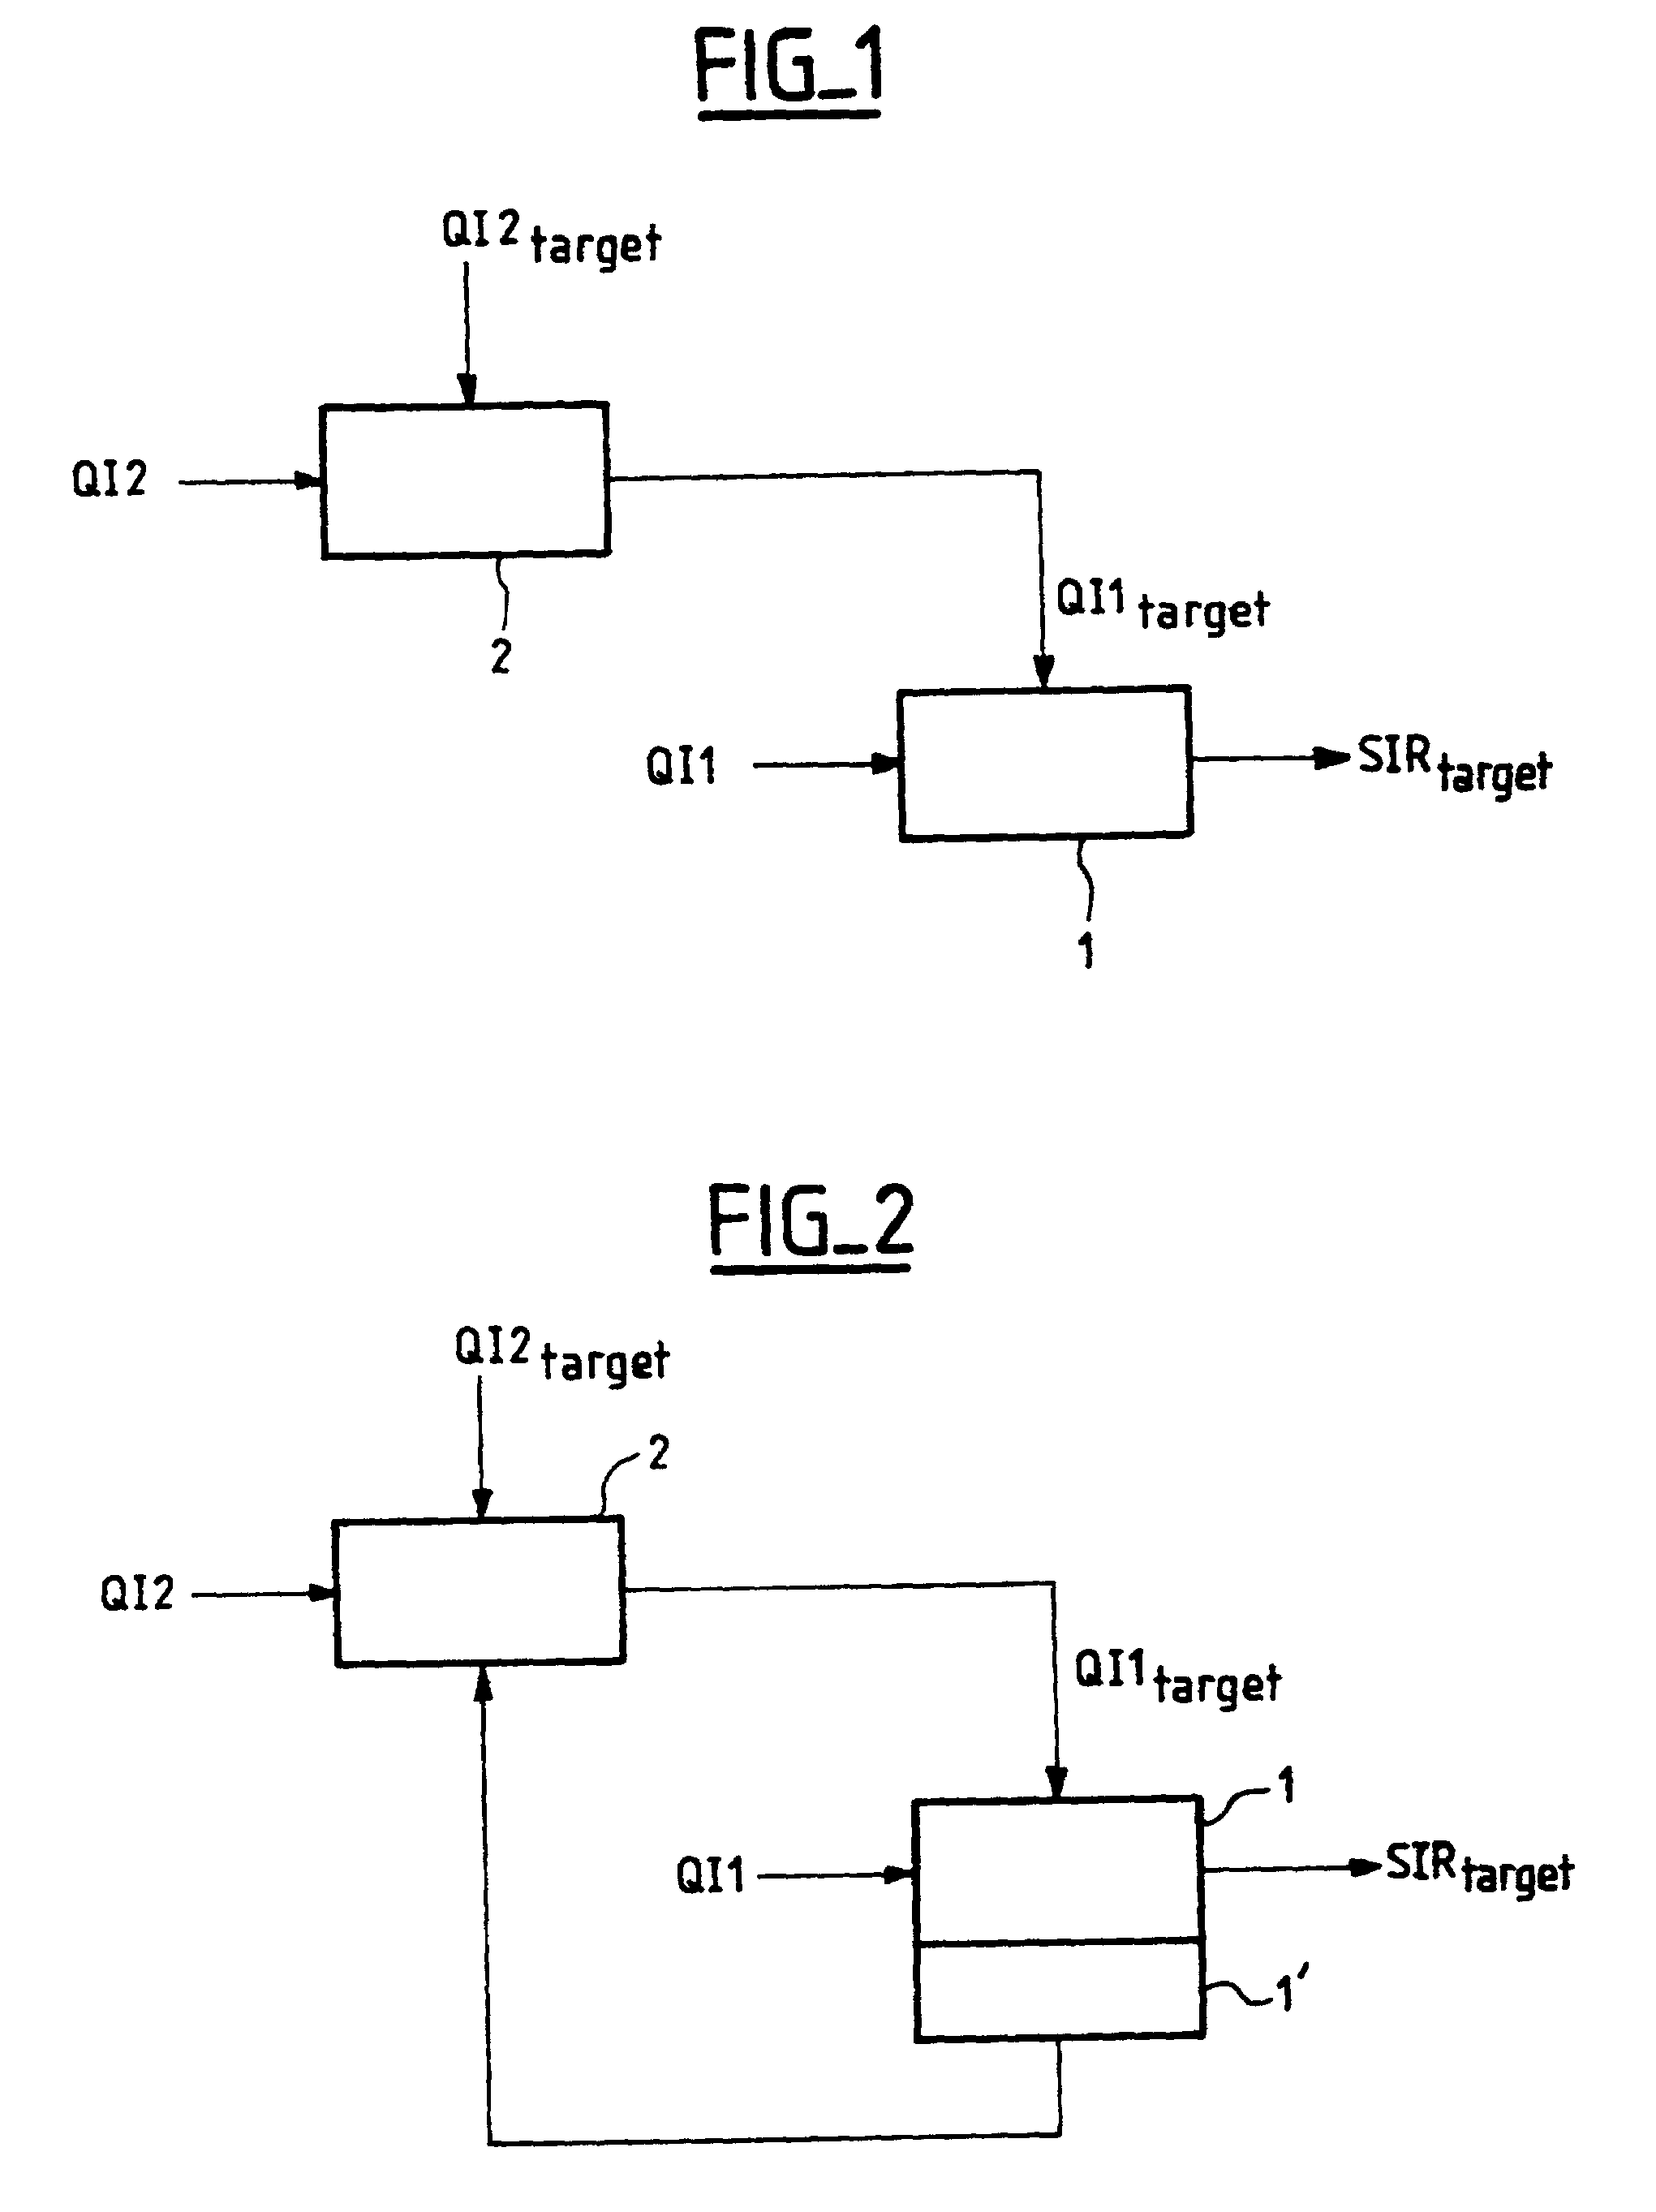 Method of adjusting the target value of an inner power control loop in a mobile radiocommunications system